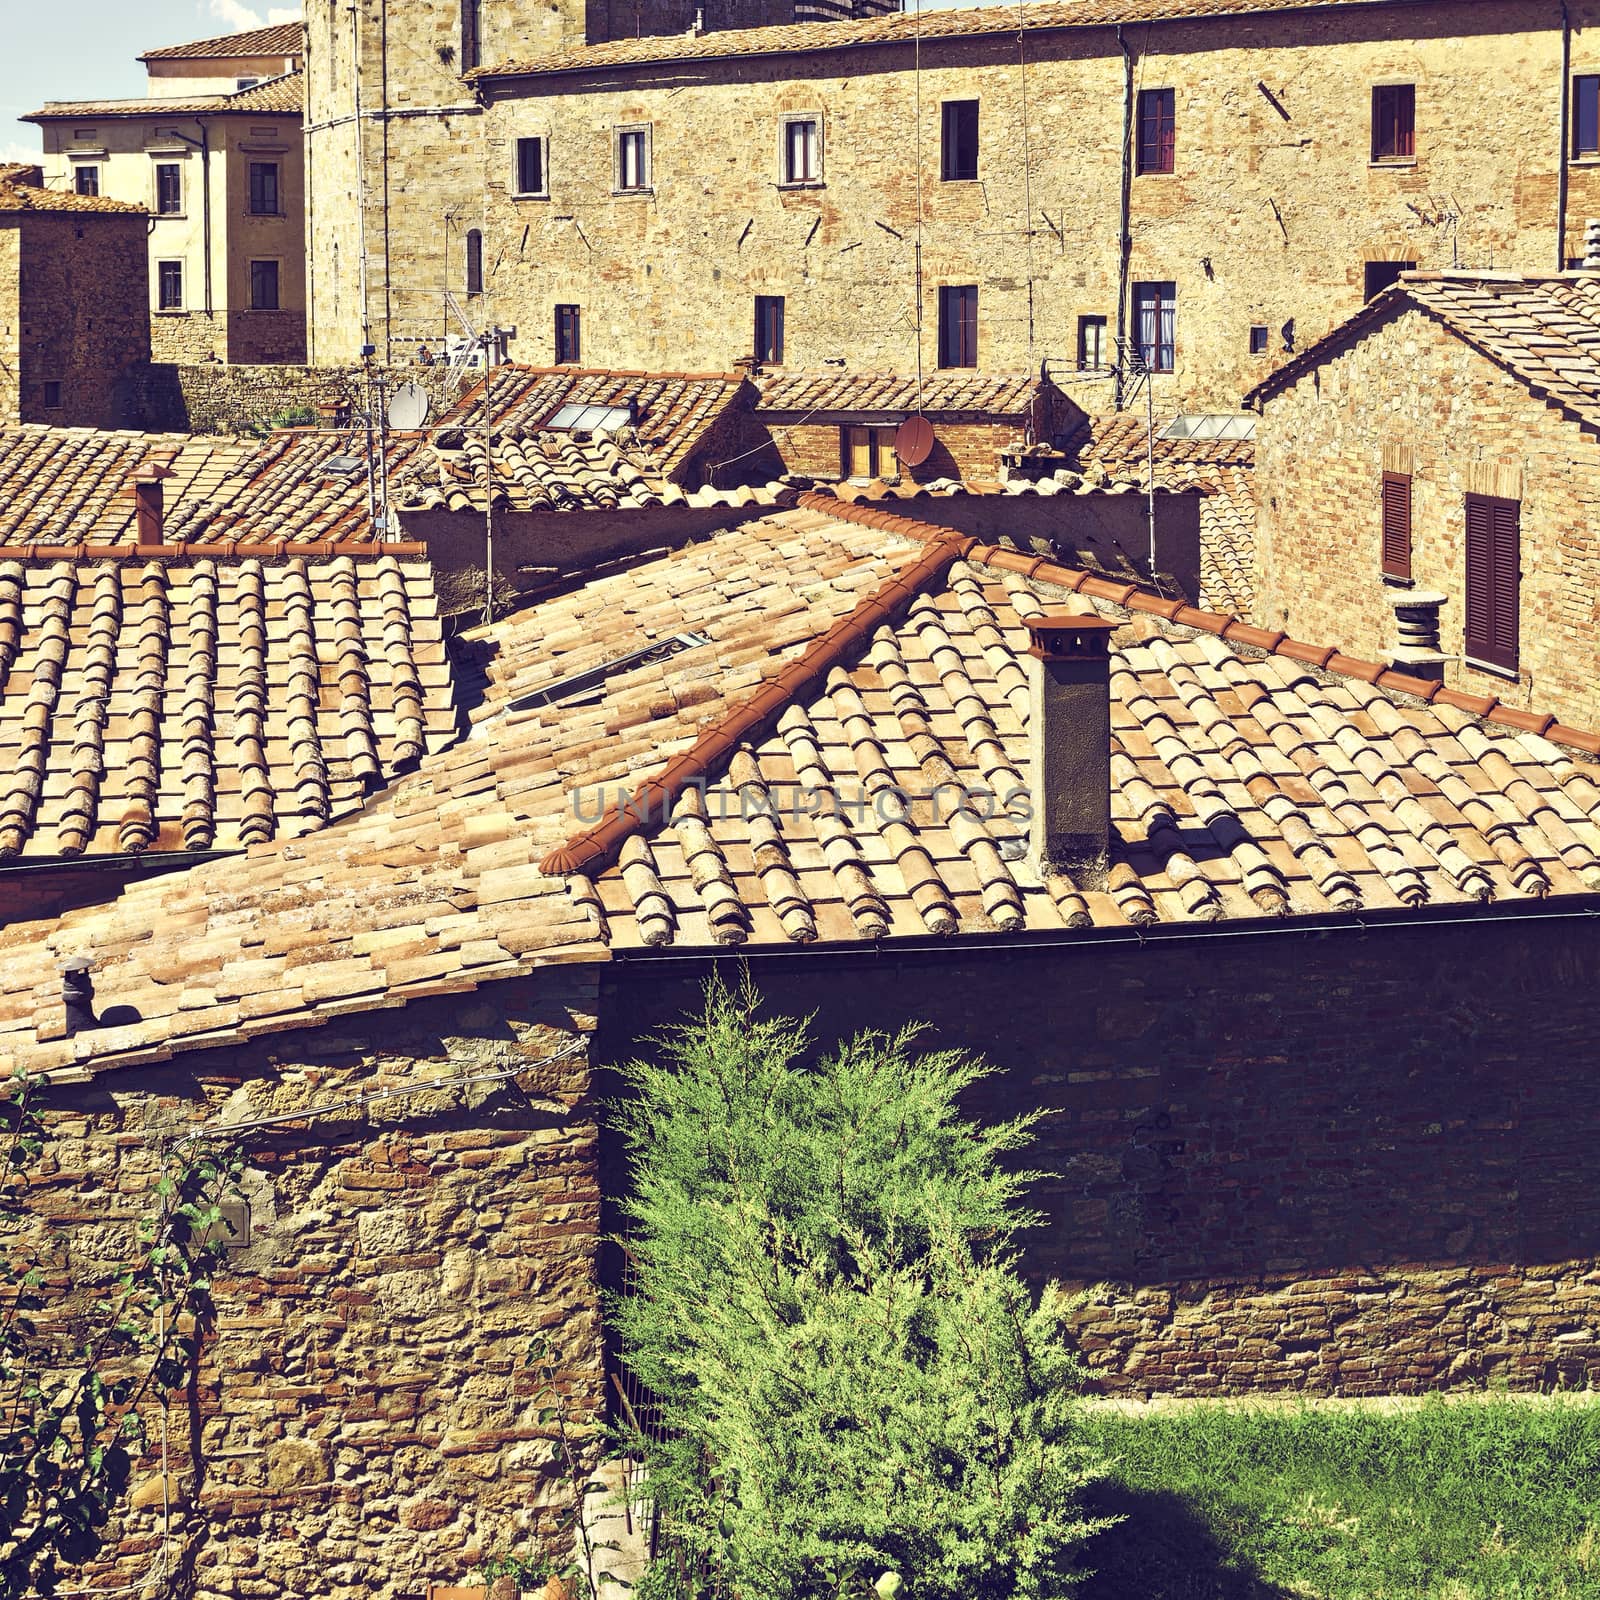 View of the Medieval City of Volterra in Italy, Vintage Style Toned Picture